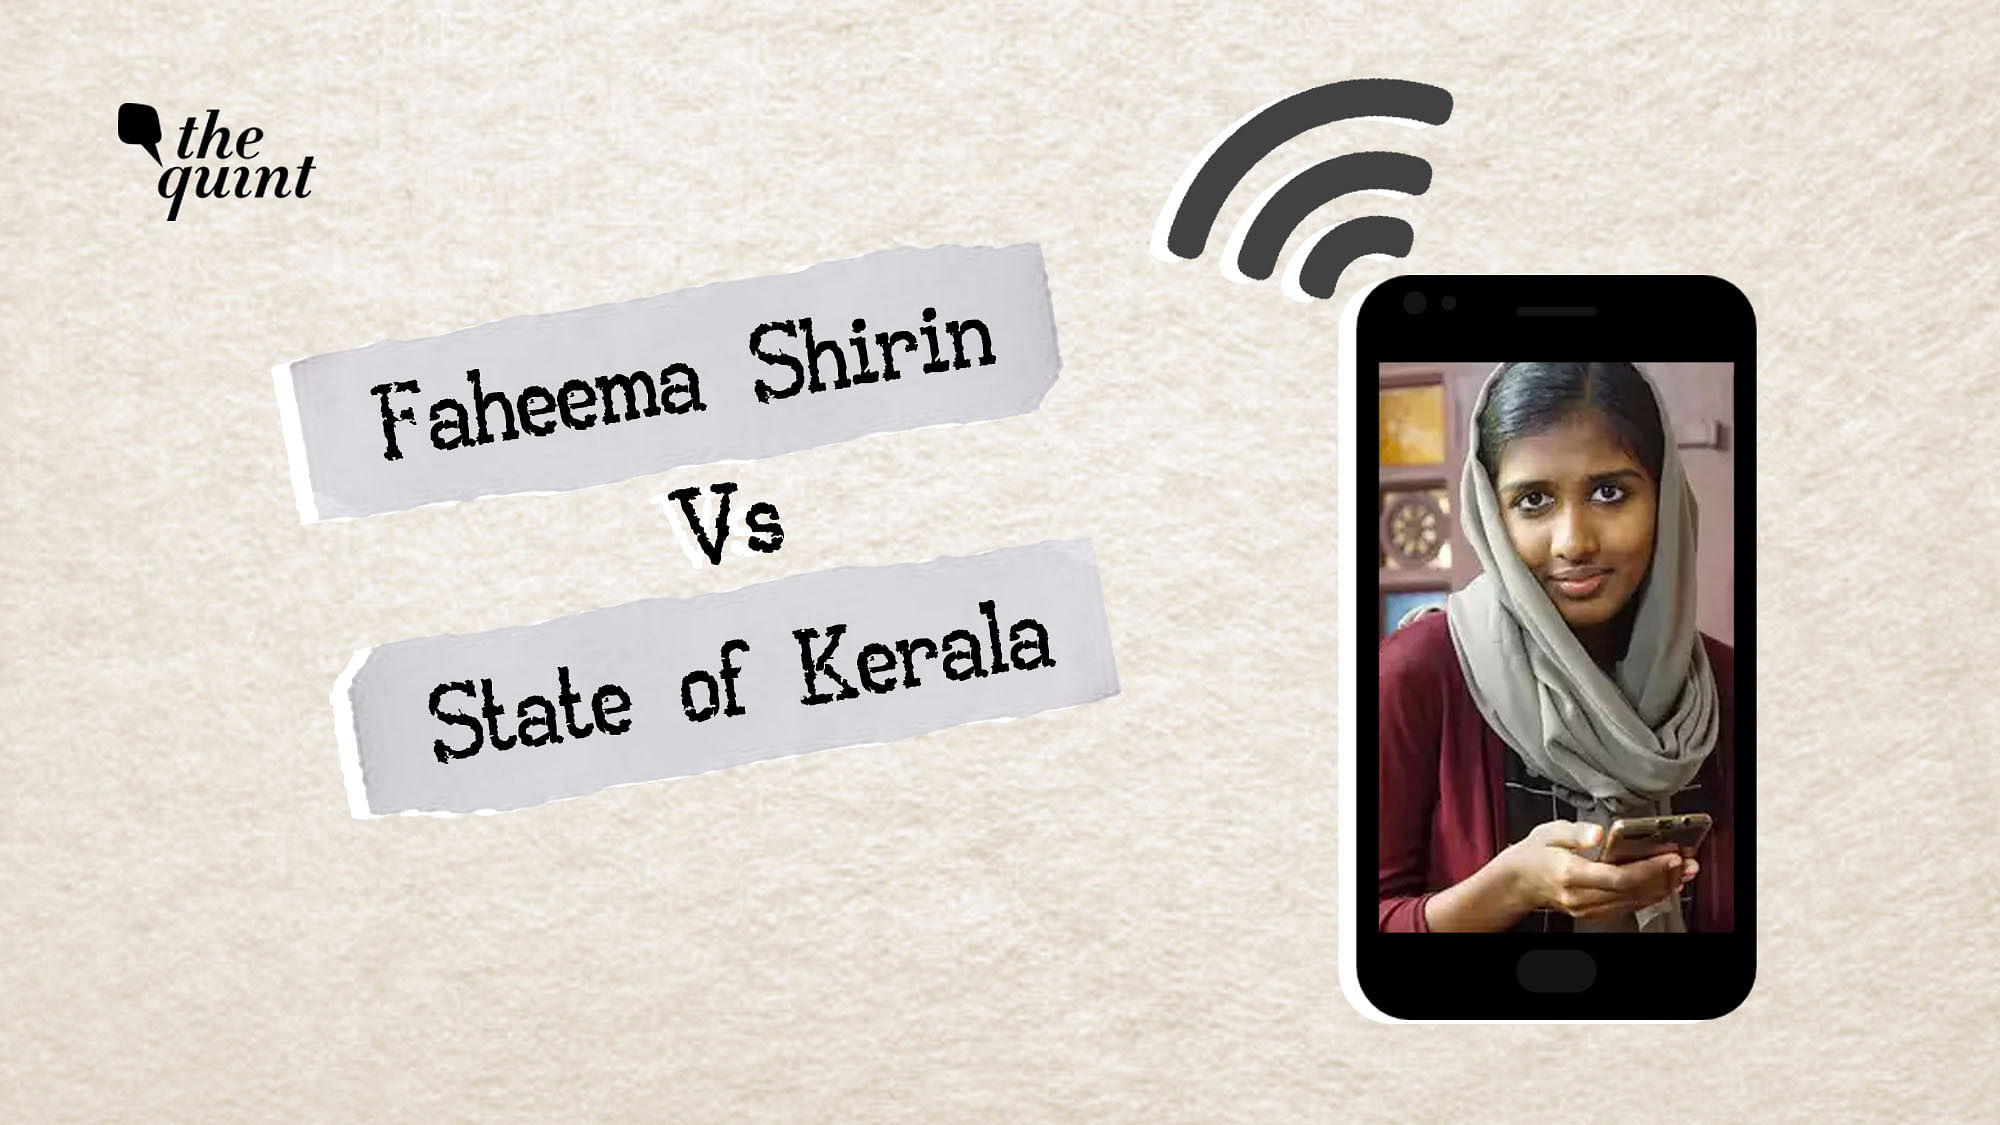 Faheema Shirin, a student of Sree Narayana Guru College, filed a petition in Kerala High Court against the girls’ hostel rule banning the use of mobile phones from 6 pm to 10 pm, which restricted them from accessing internet.